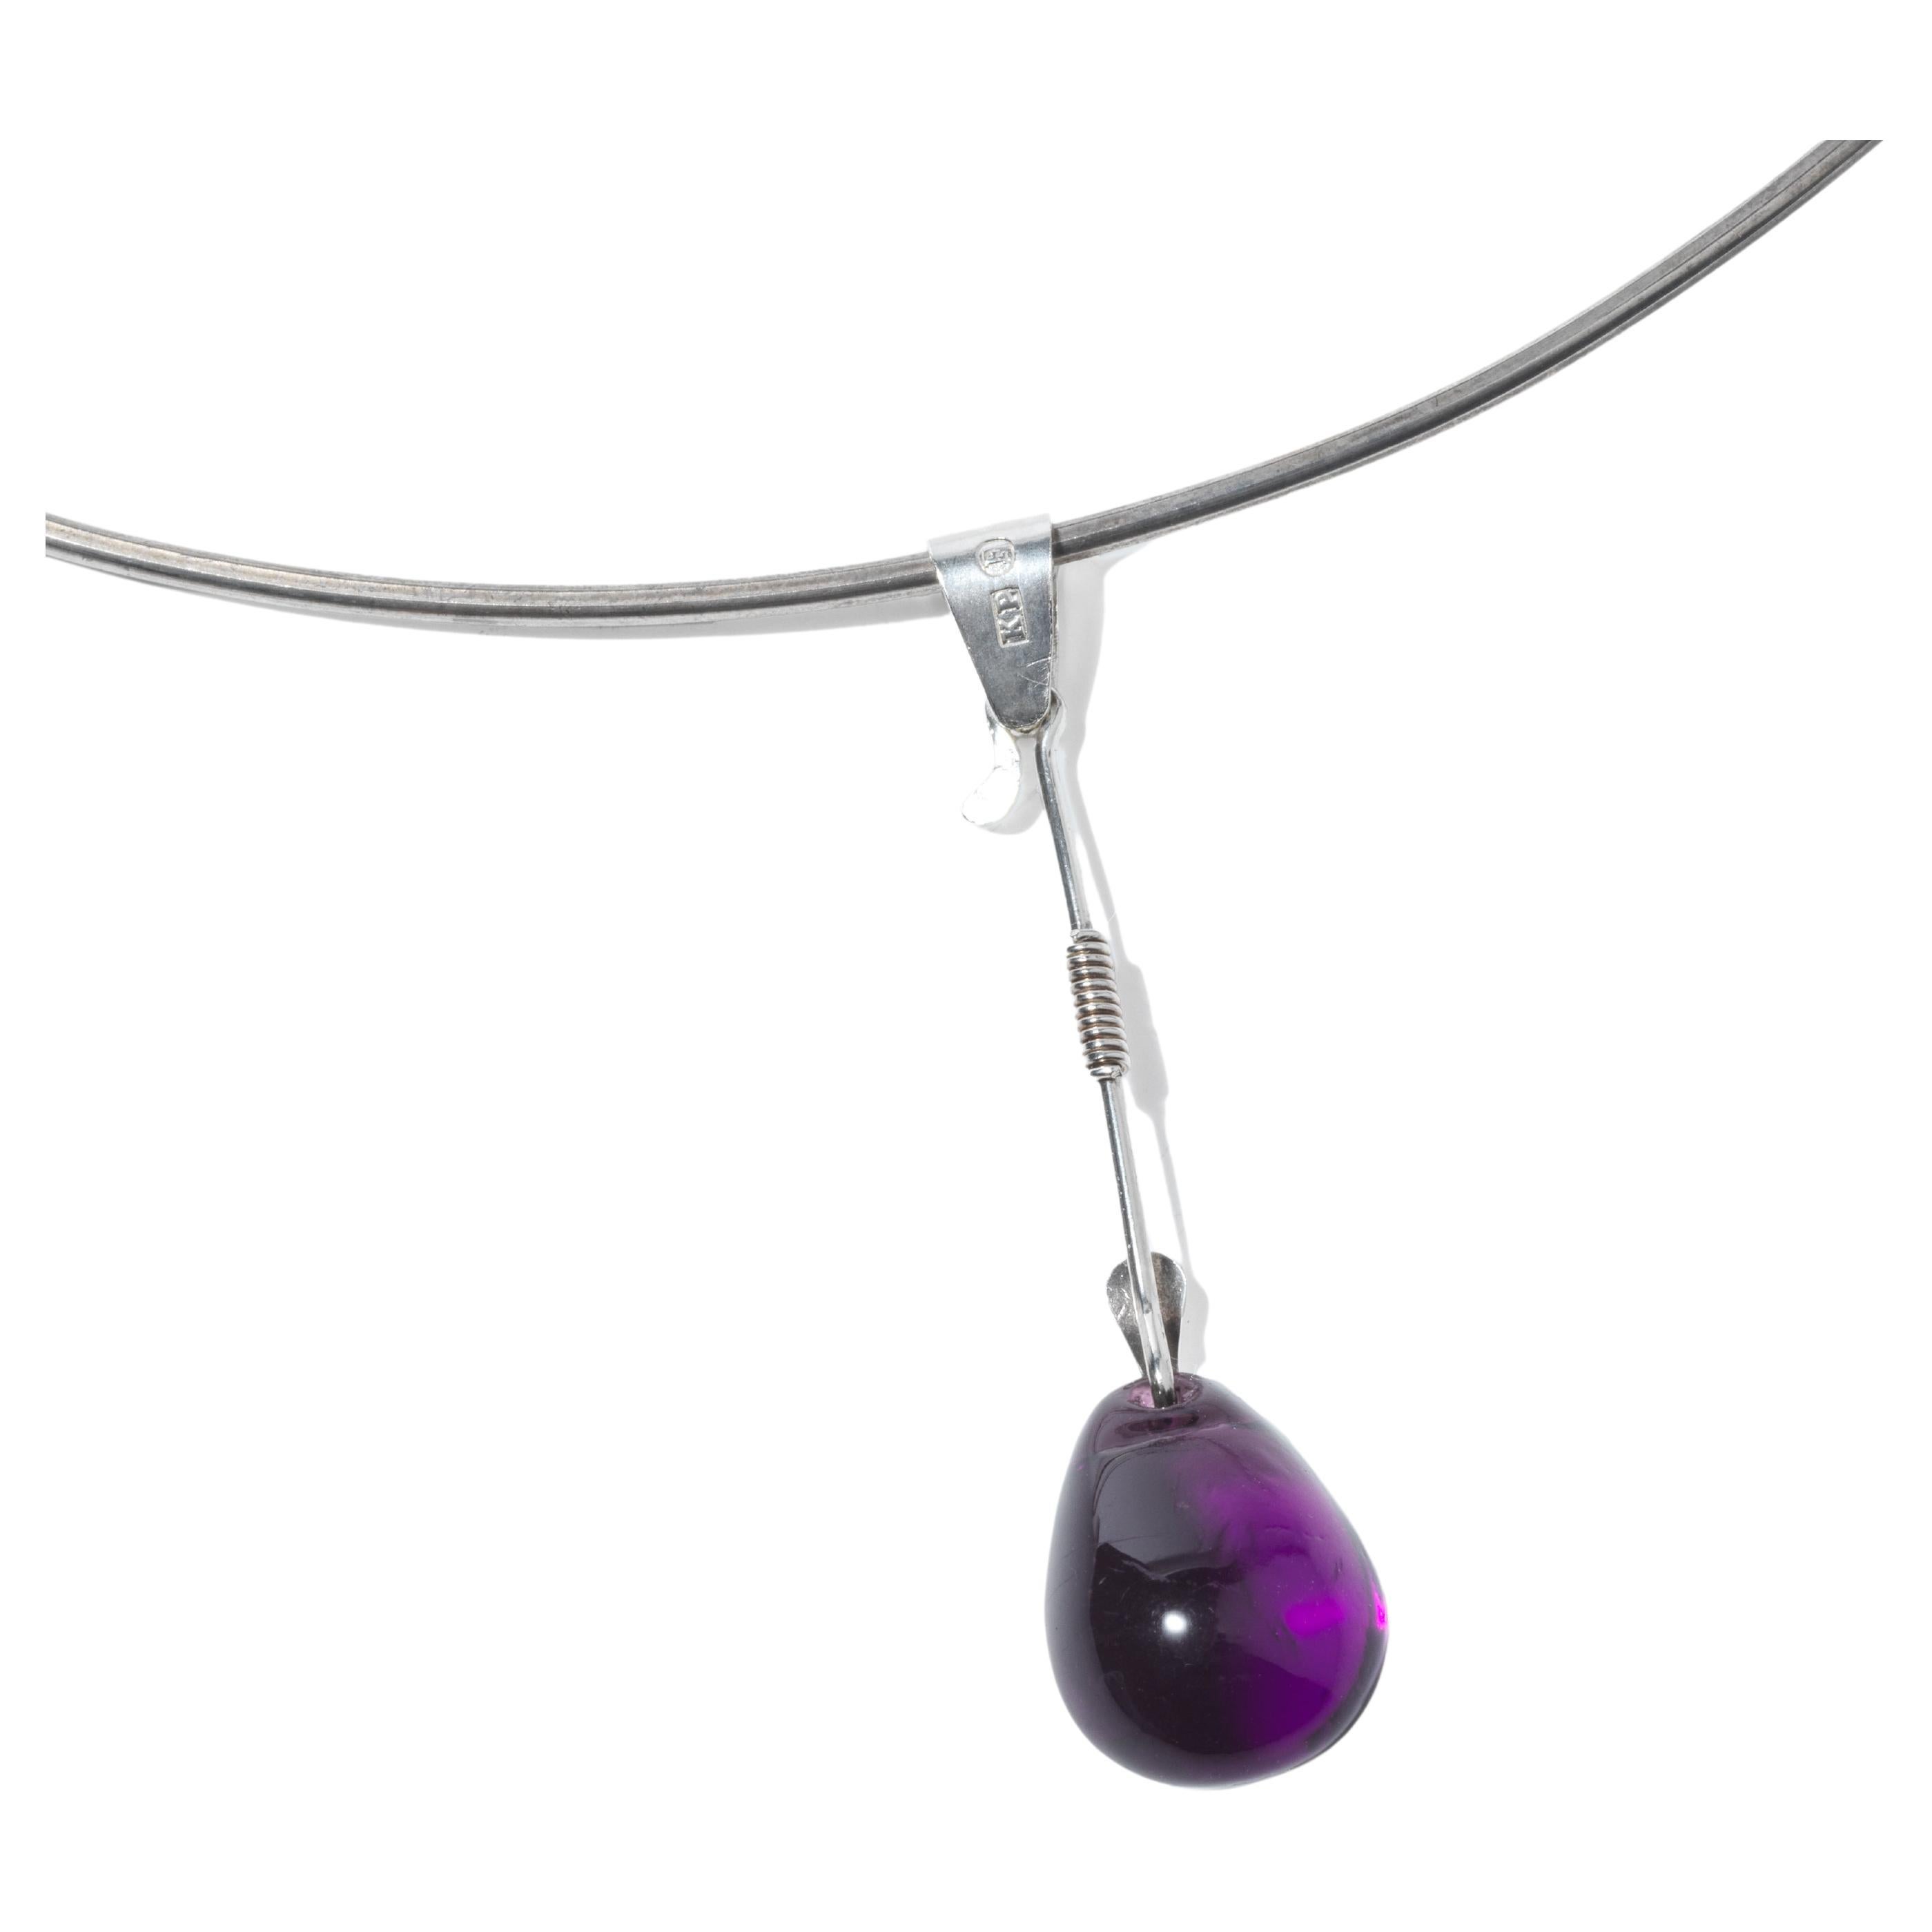 This neck ring is a simple, elegant silver piece with a sleek and modern design. A single, teardrop-shaped amethyst pendant dangles gracefully from the center, its deep purple hue providing a striking contrast against the silver. When worn, the neck